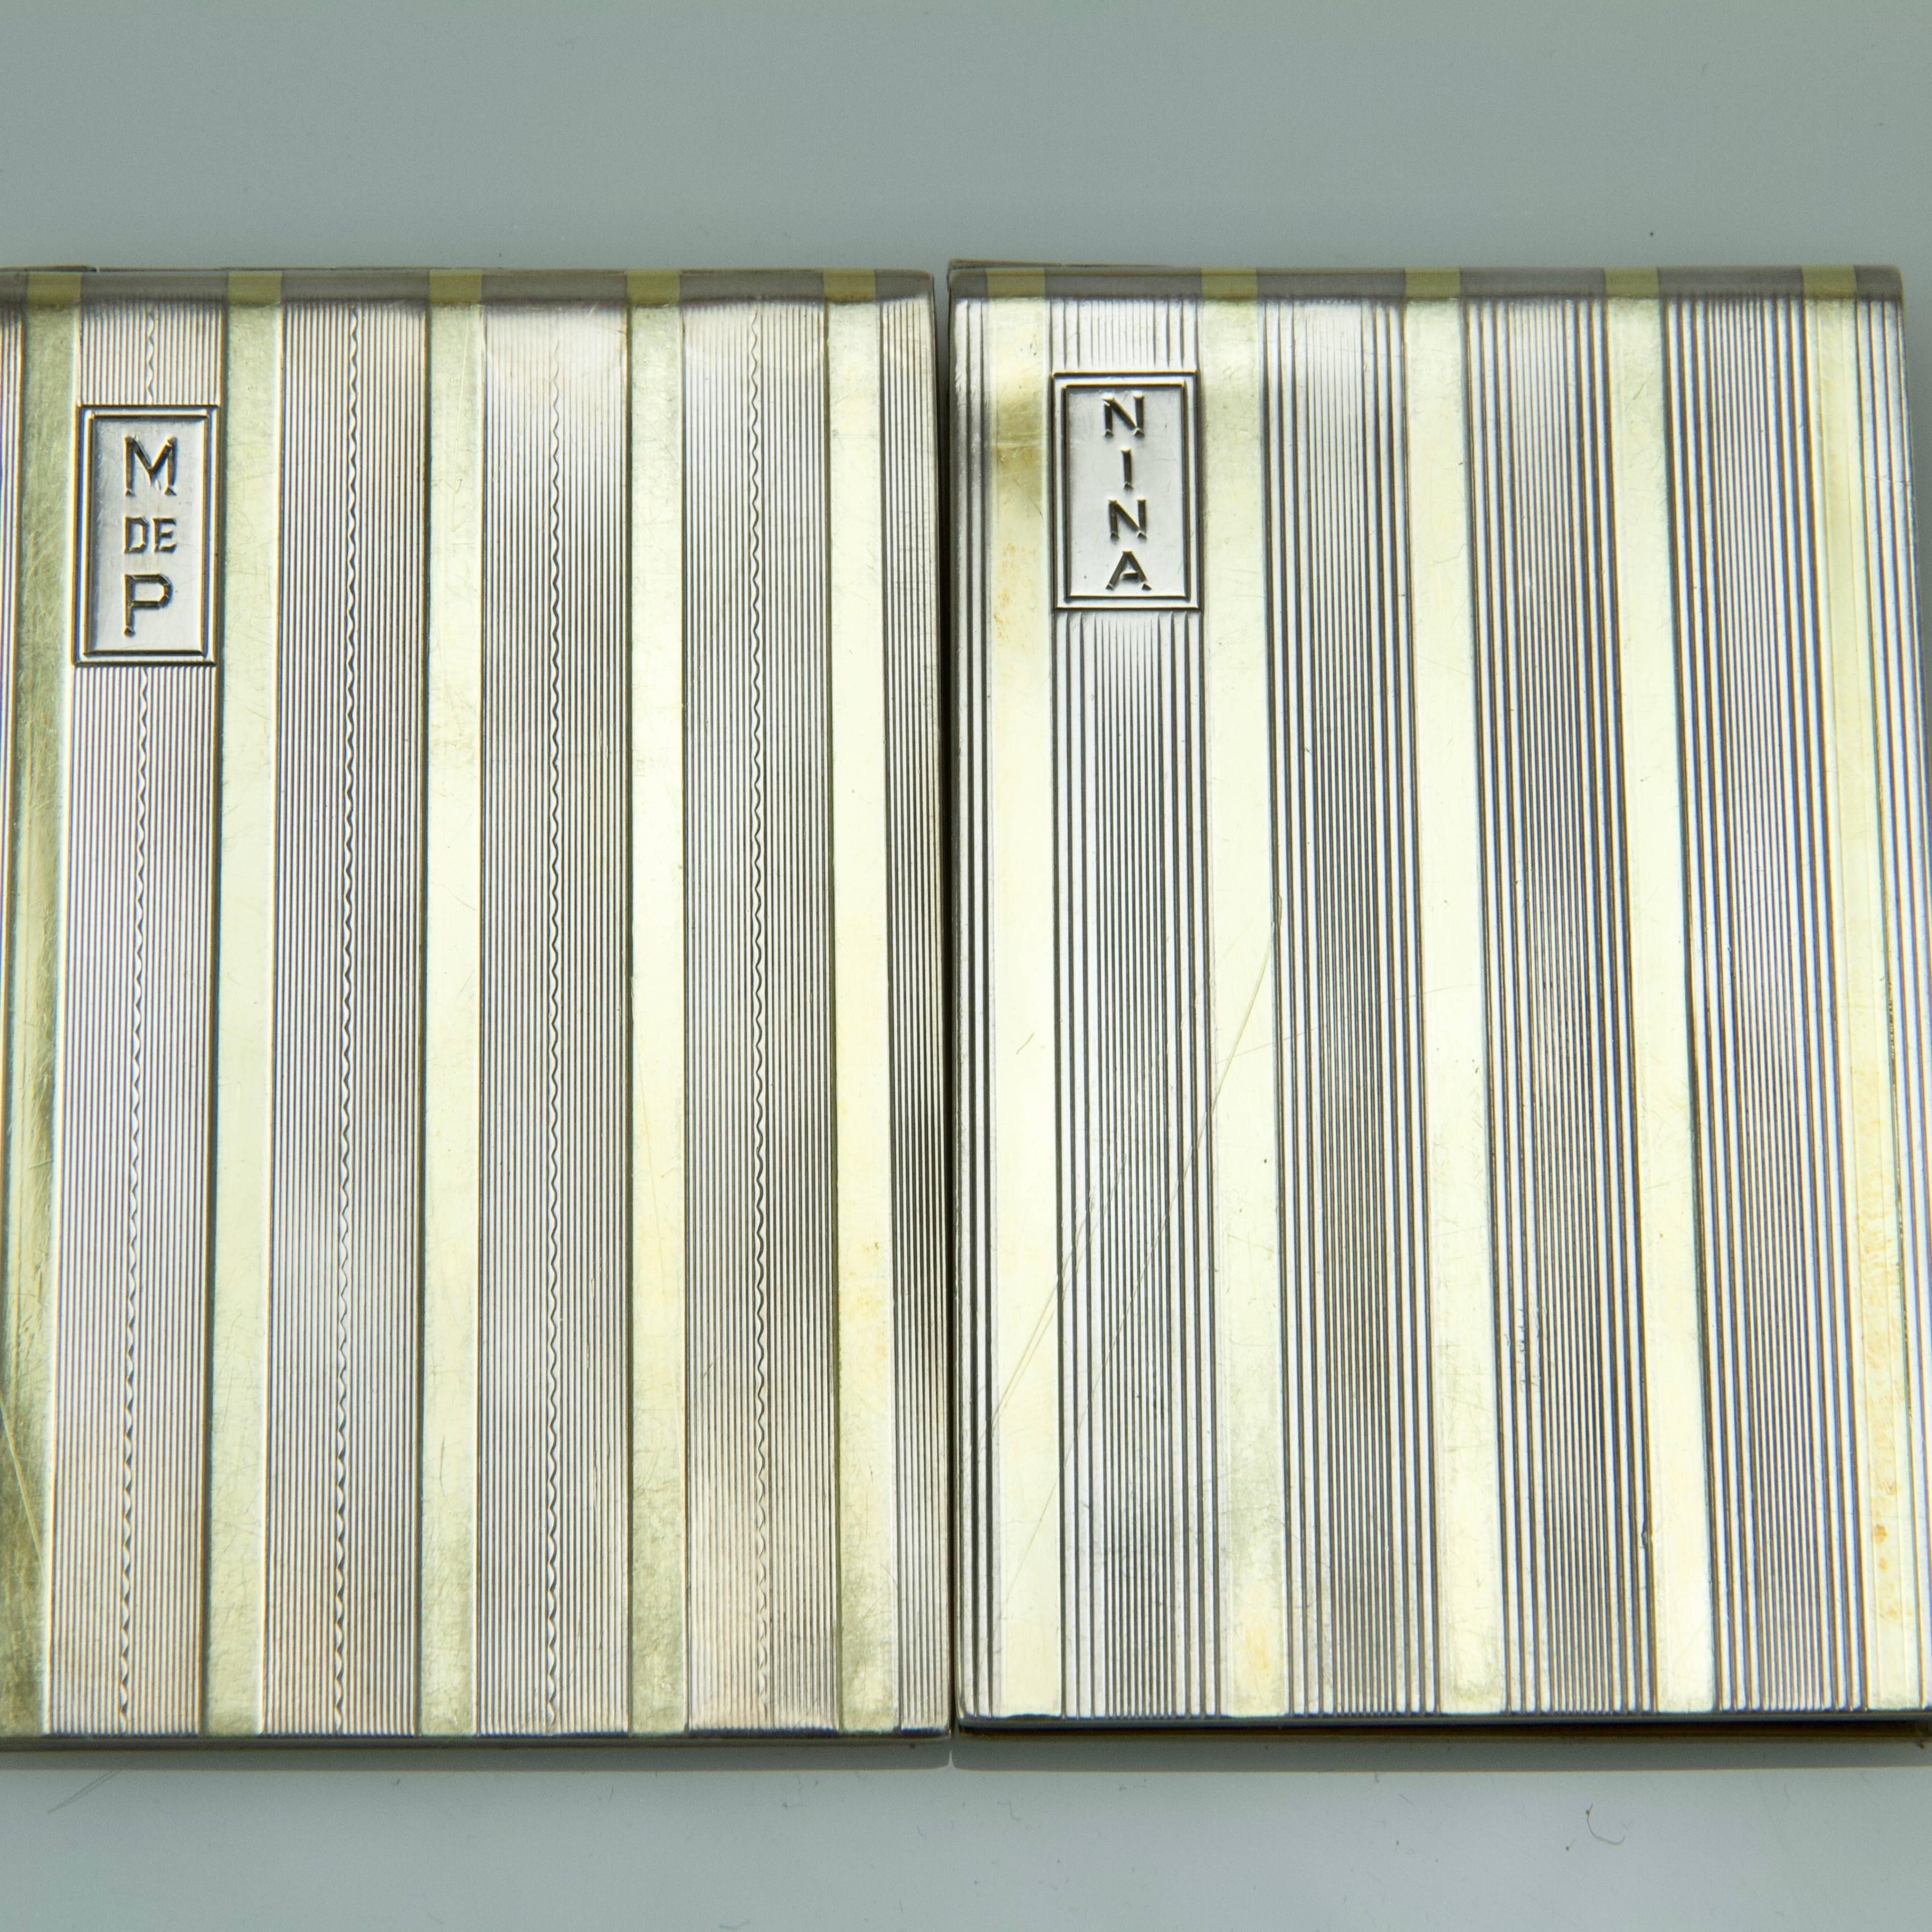 A unusual and complete rectangular pair of check cases by Cartier, Londres. The surface presenting two types of gold and silver alternating stripes patterns. One engraved at the top in a rectangulaire cartouche M de P for Marquis de Polignac, the